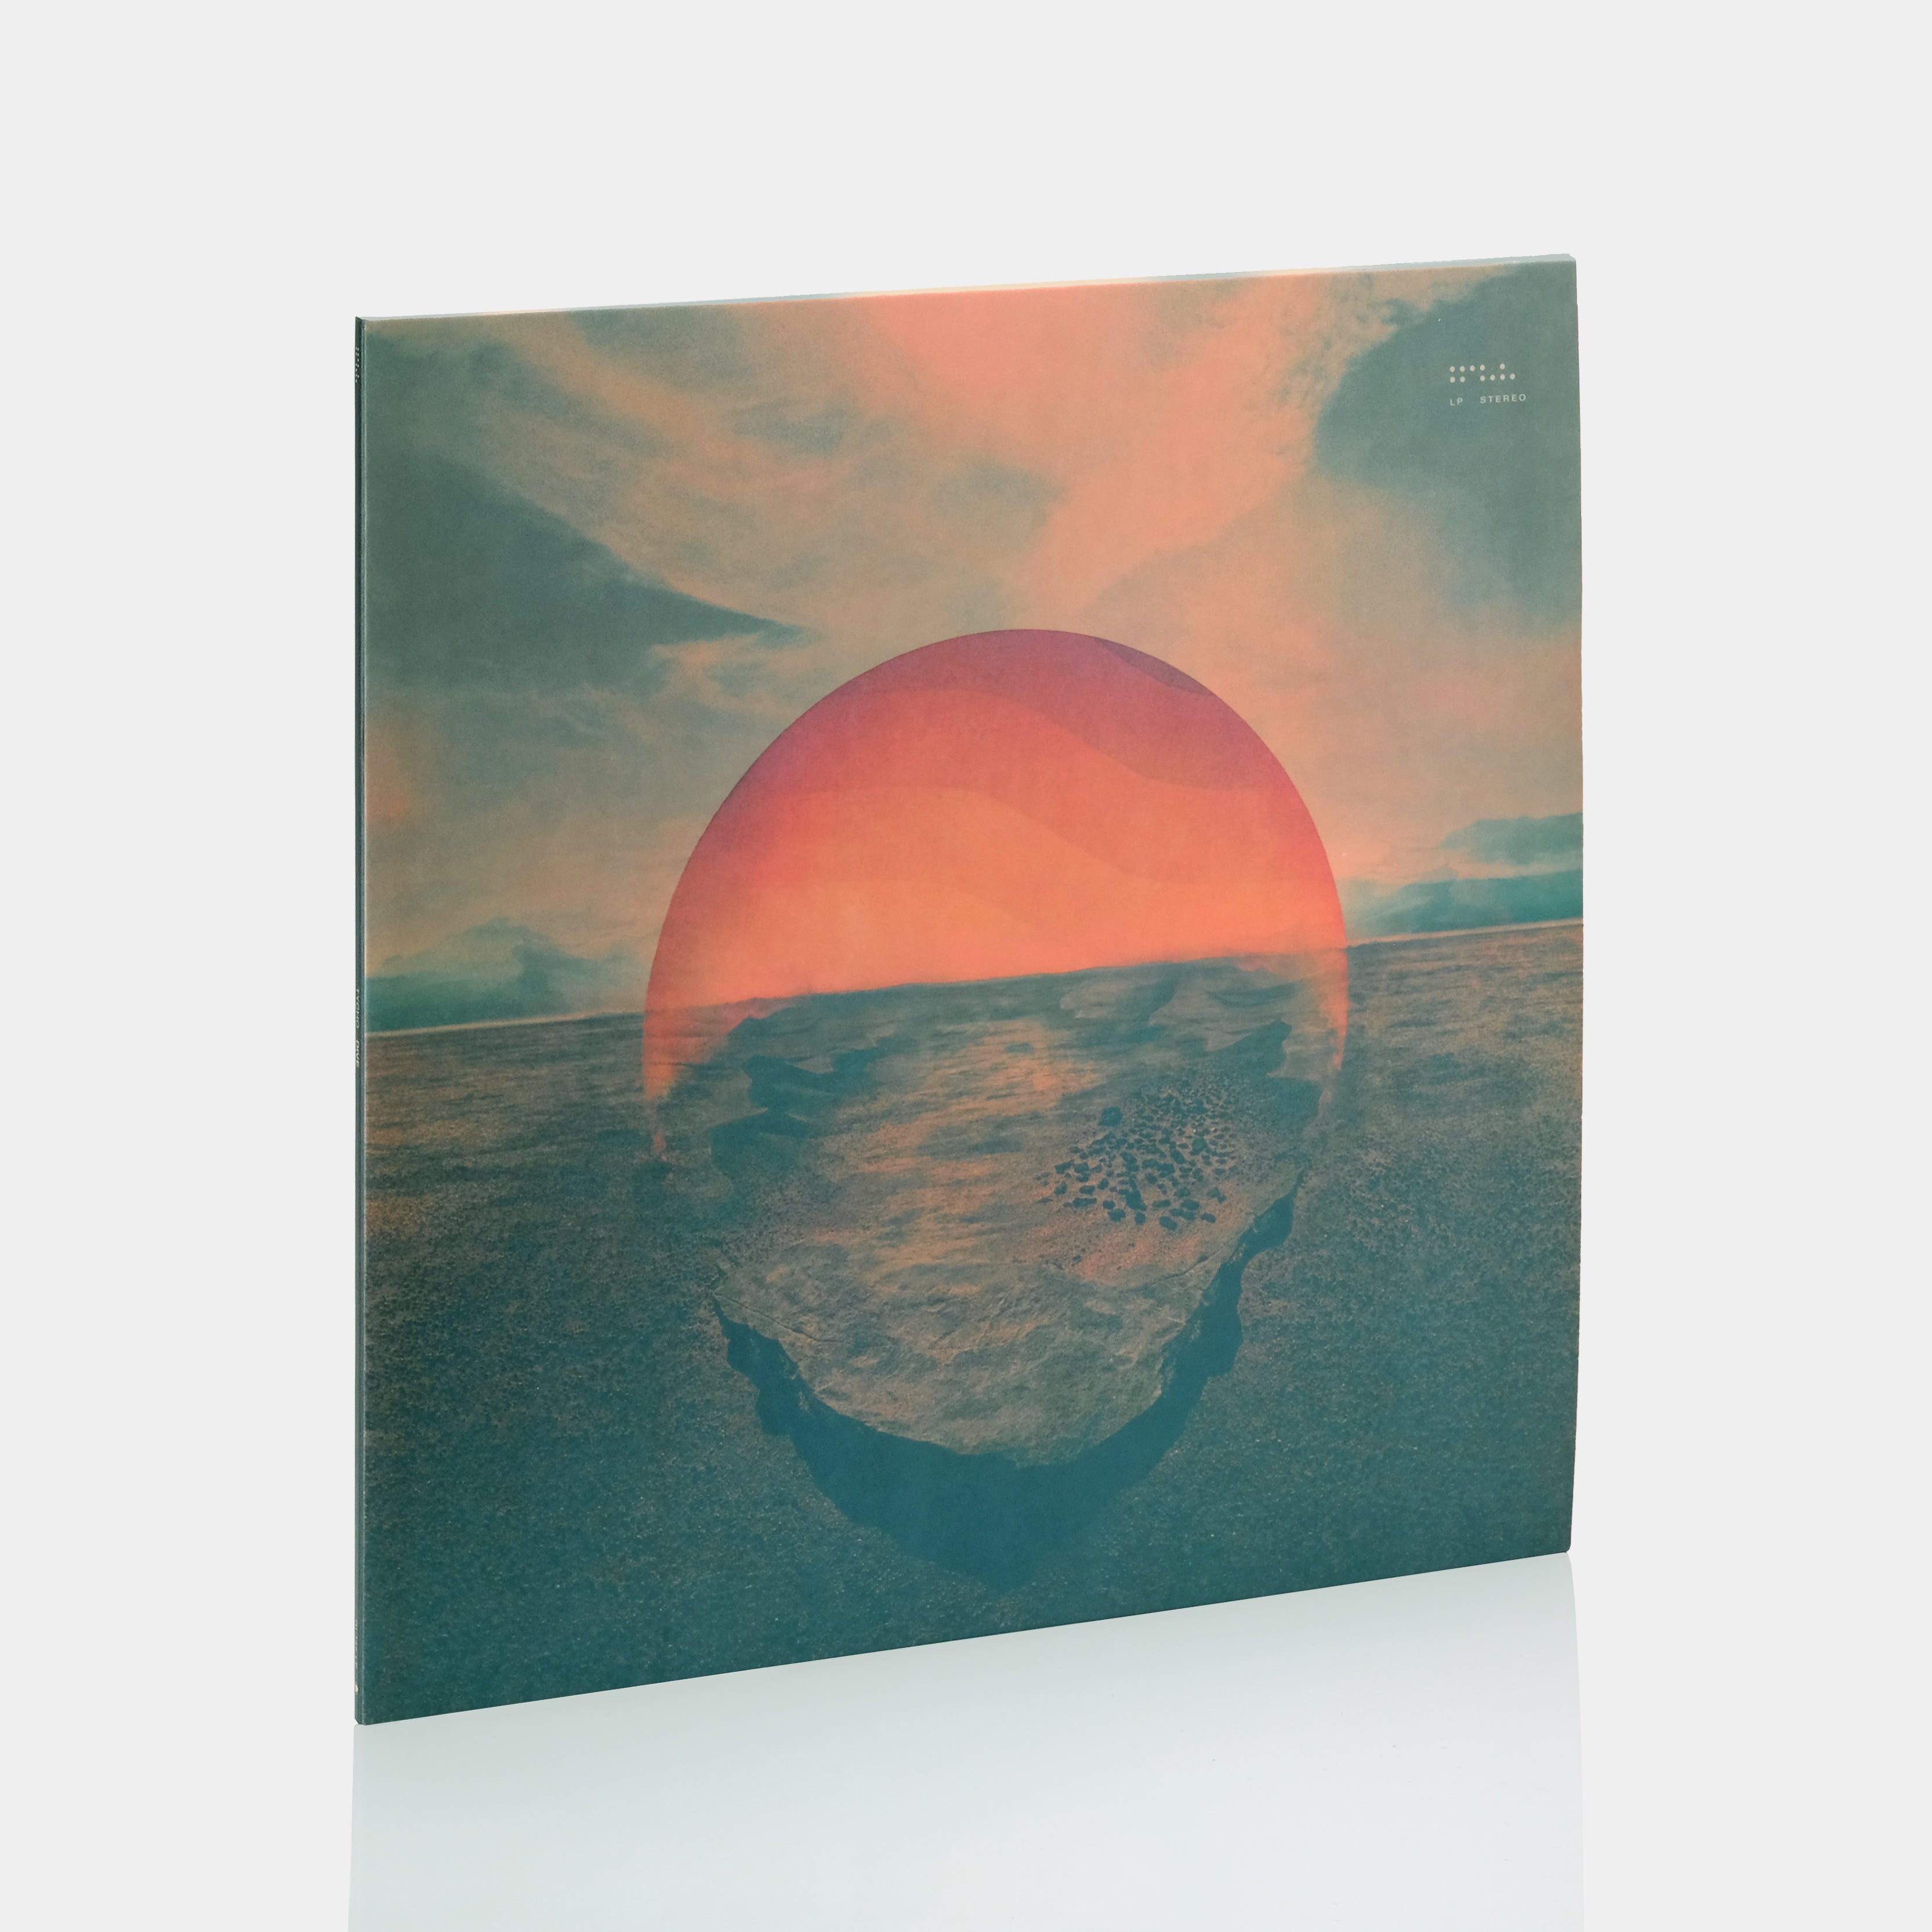 Tycho - Dive (10th Anniversary Edition) 2xLP Orange and Red Marbled Vinyl Record